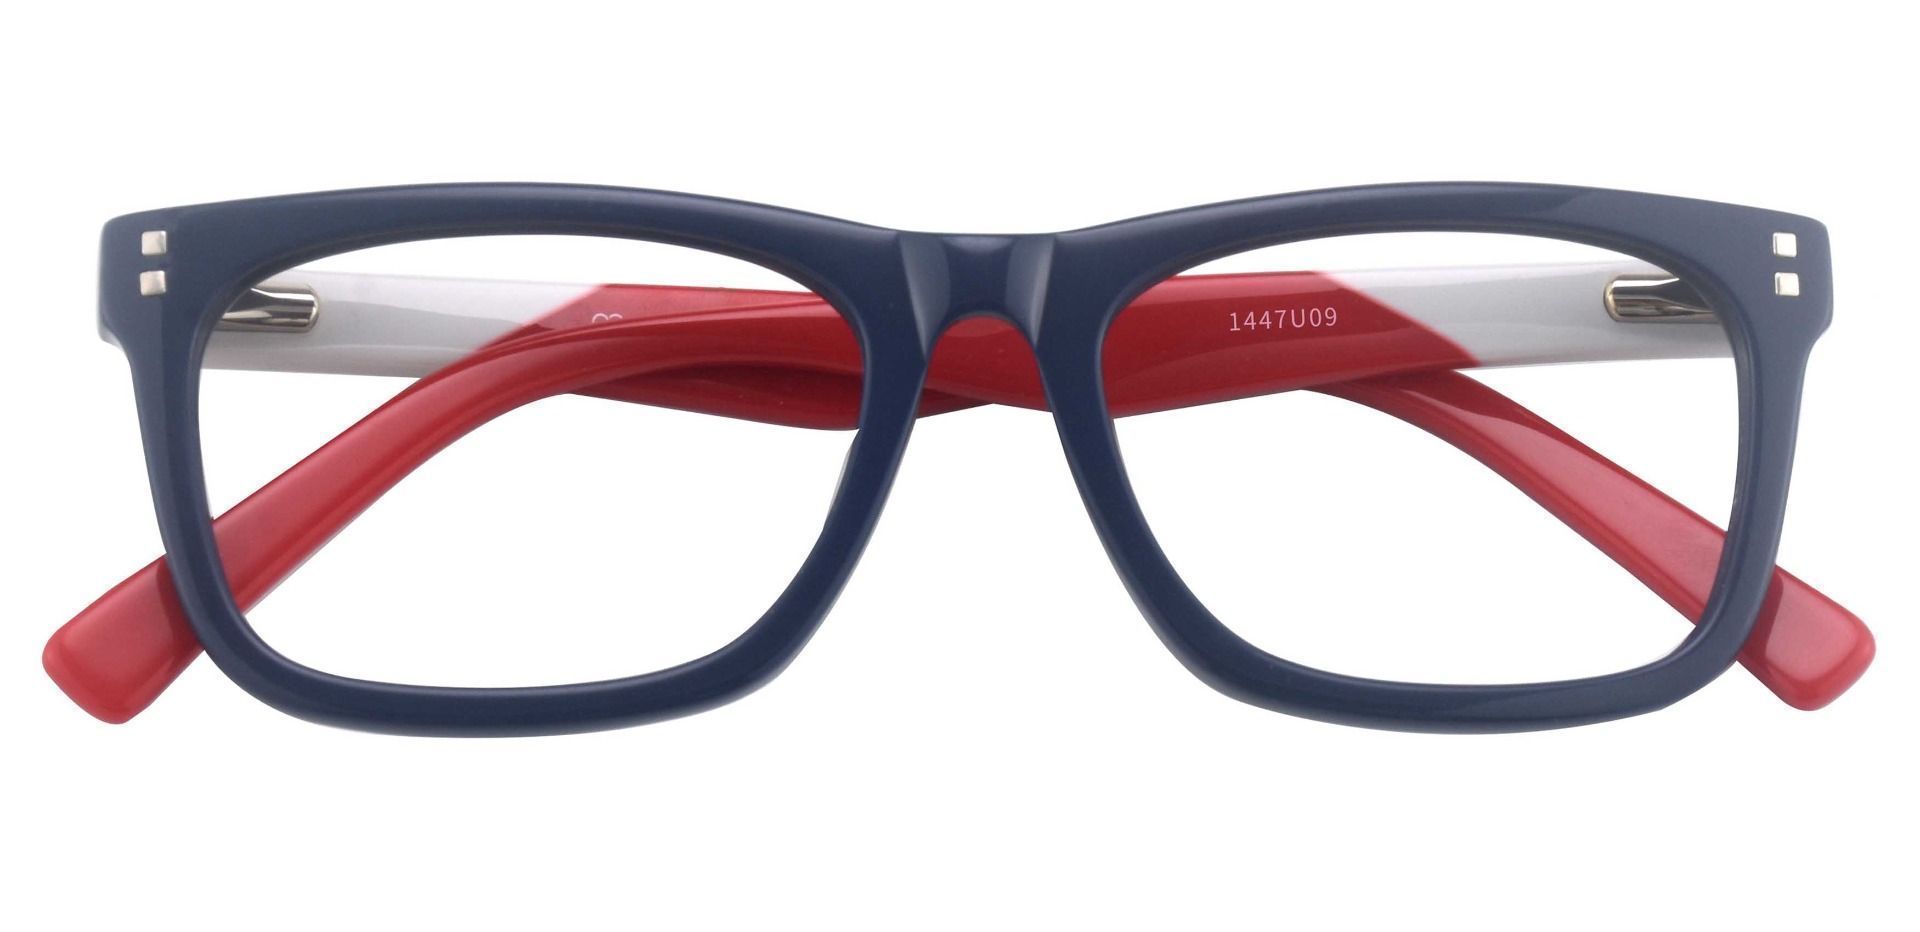 Harbor Rectangle Blue Light Blocking Glasses - The Frame Is Blue And Red